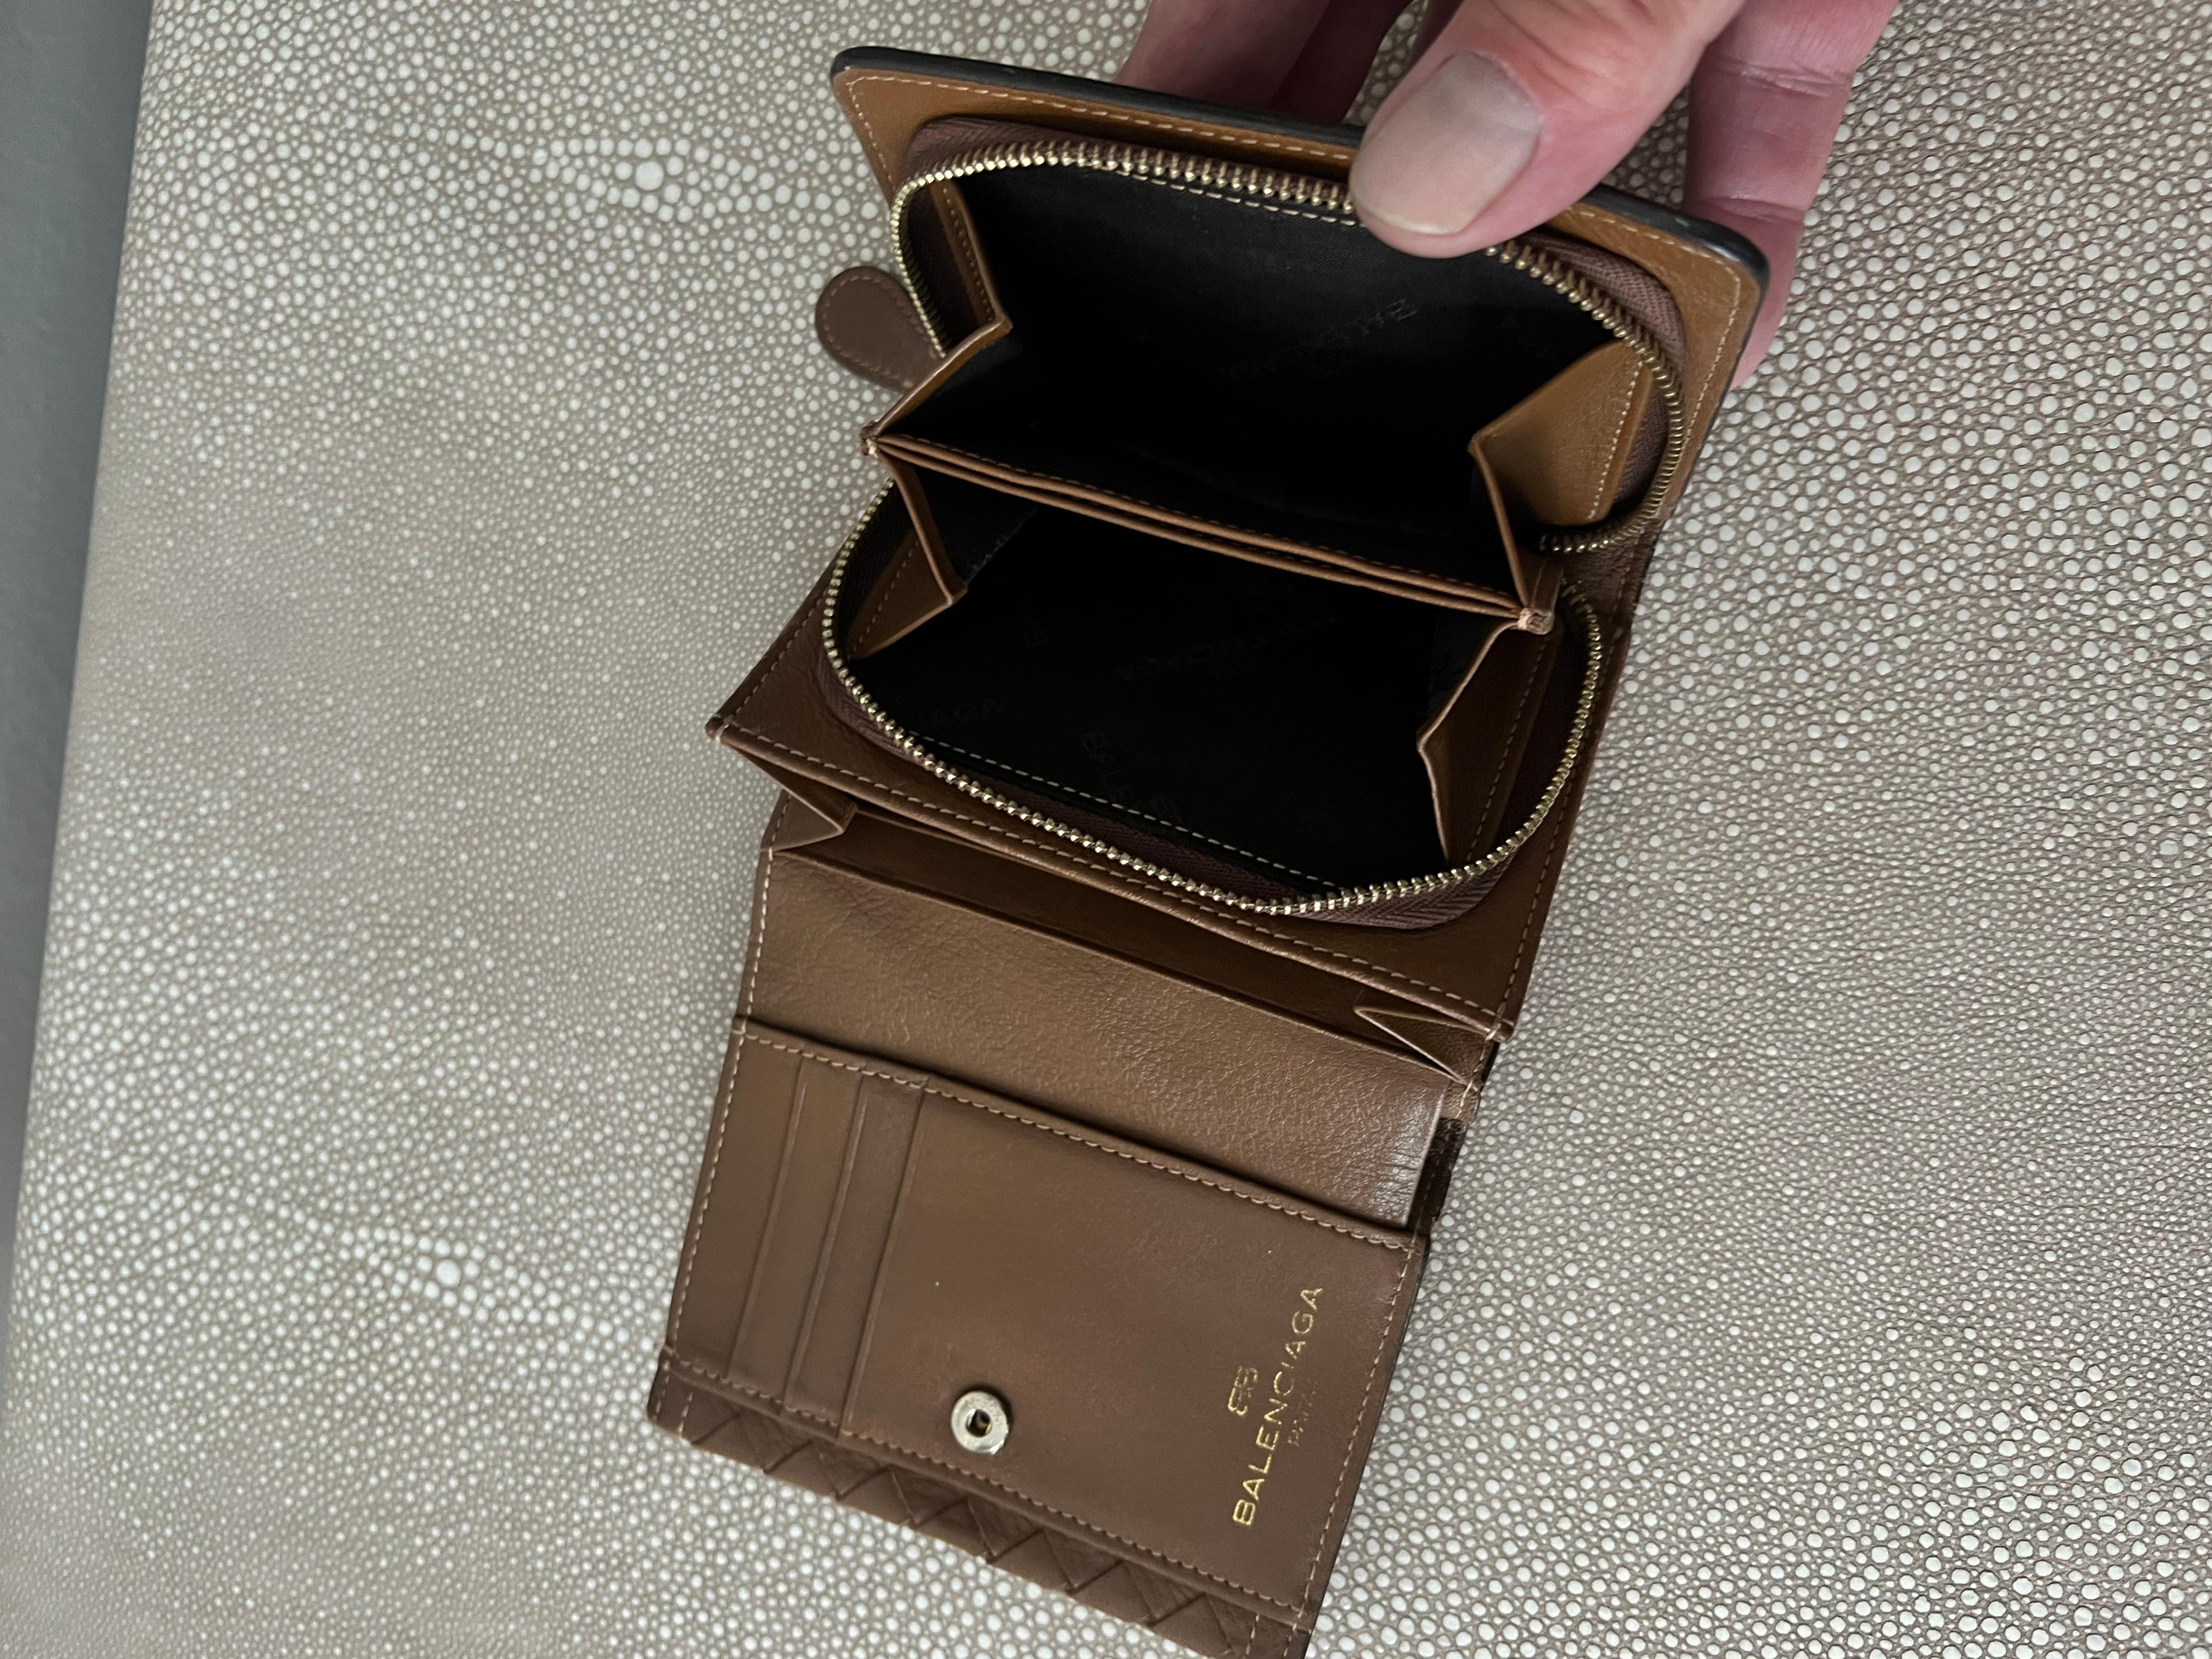 Duo Fold Balenciaga Wallet With Brass Closure In Good Condition For Sale In Los Angeles, CA